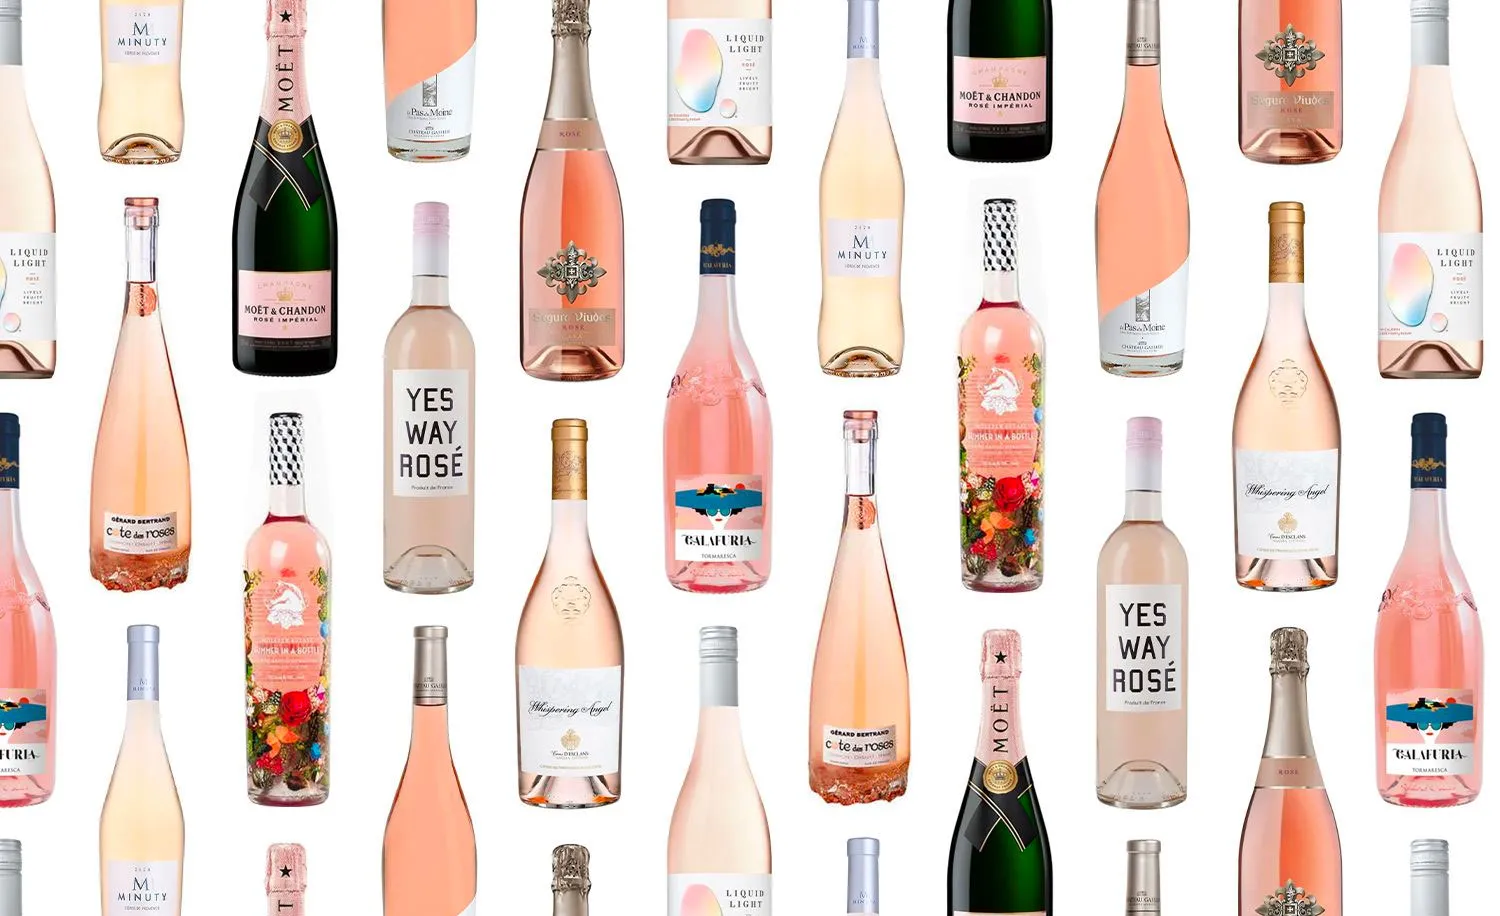 The promise of Rosé